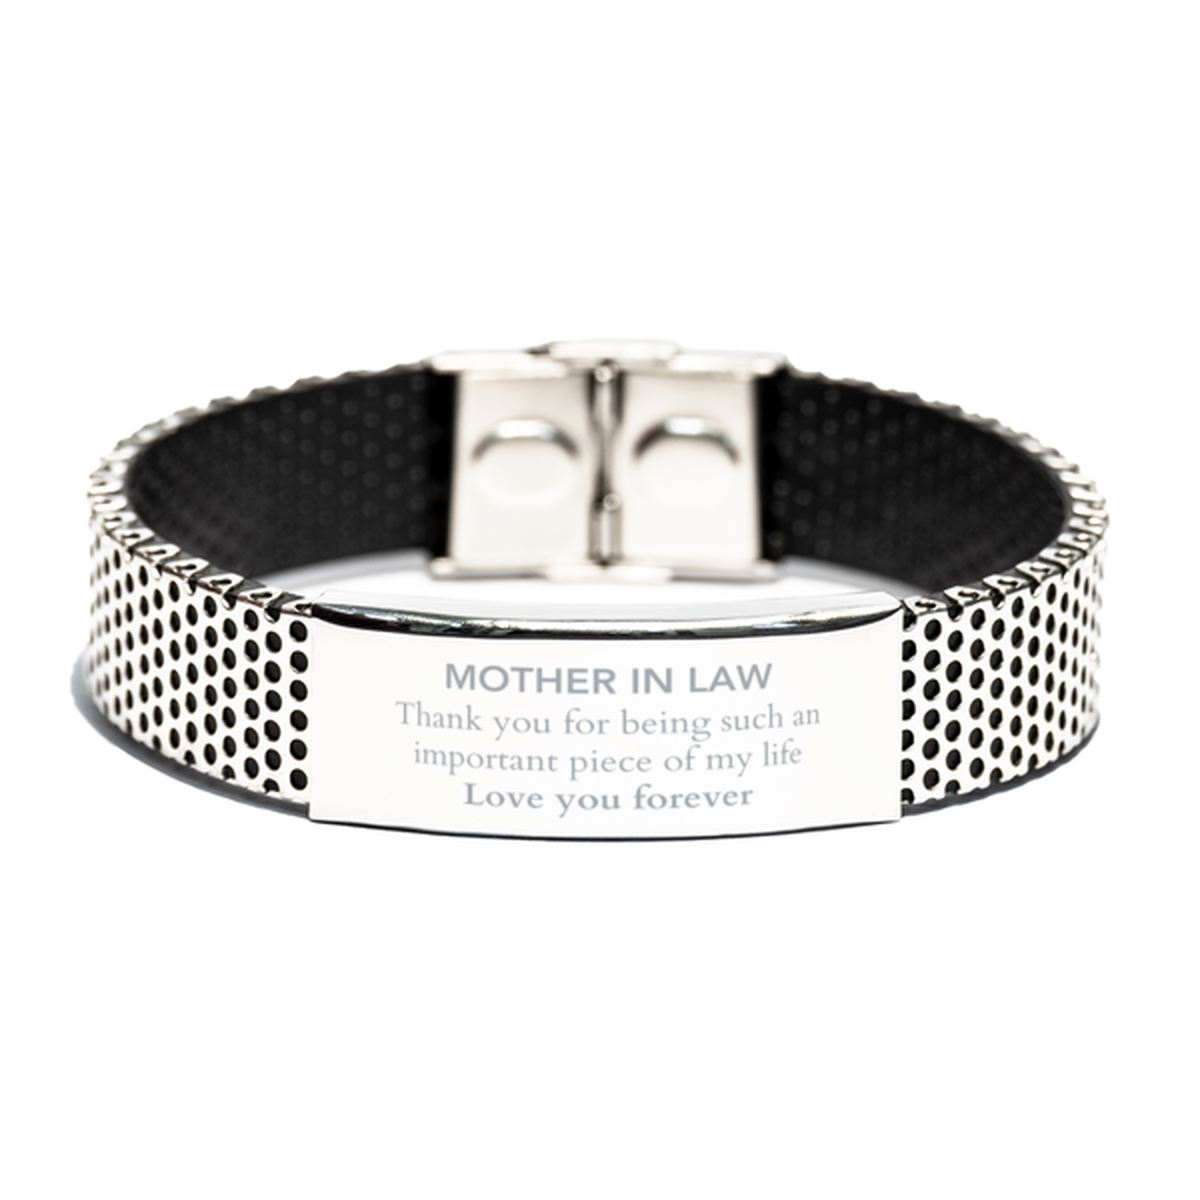 Appropriate Mother In Law Stainless Steel Bracelet Epic Birthday Gifts for Mother In Law Thank you for being such an important piece of my life Mother In Law Christmas Mothers Fathers Day